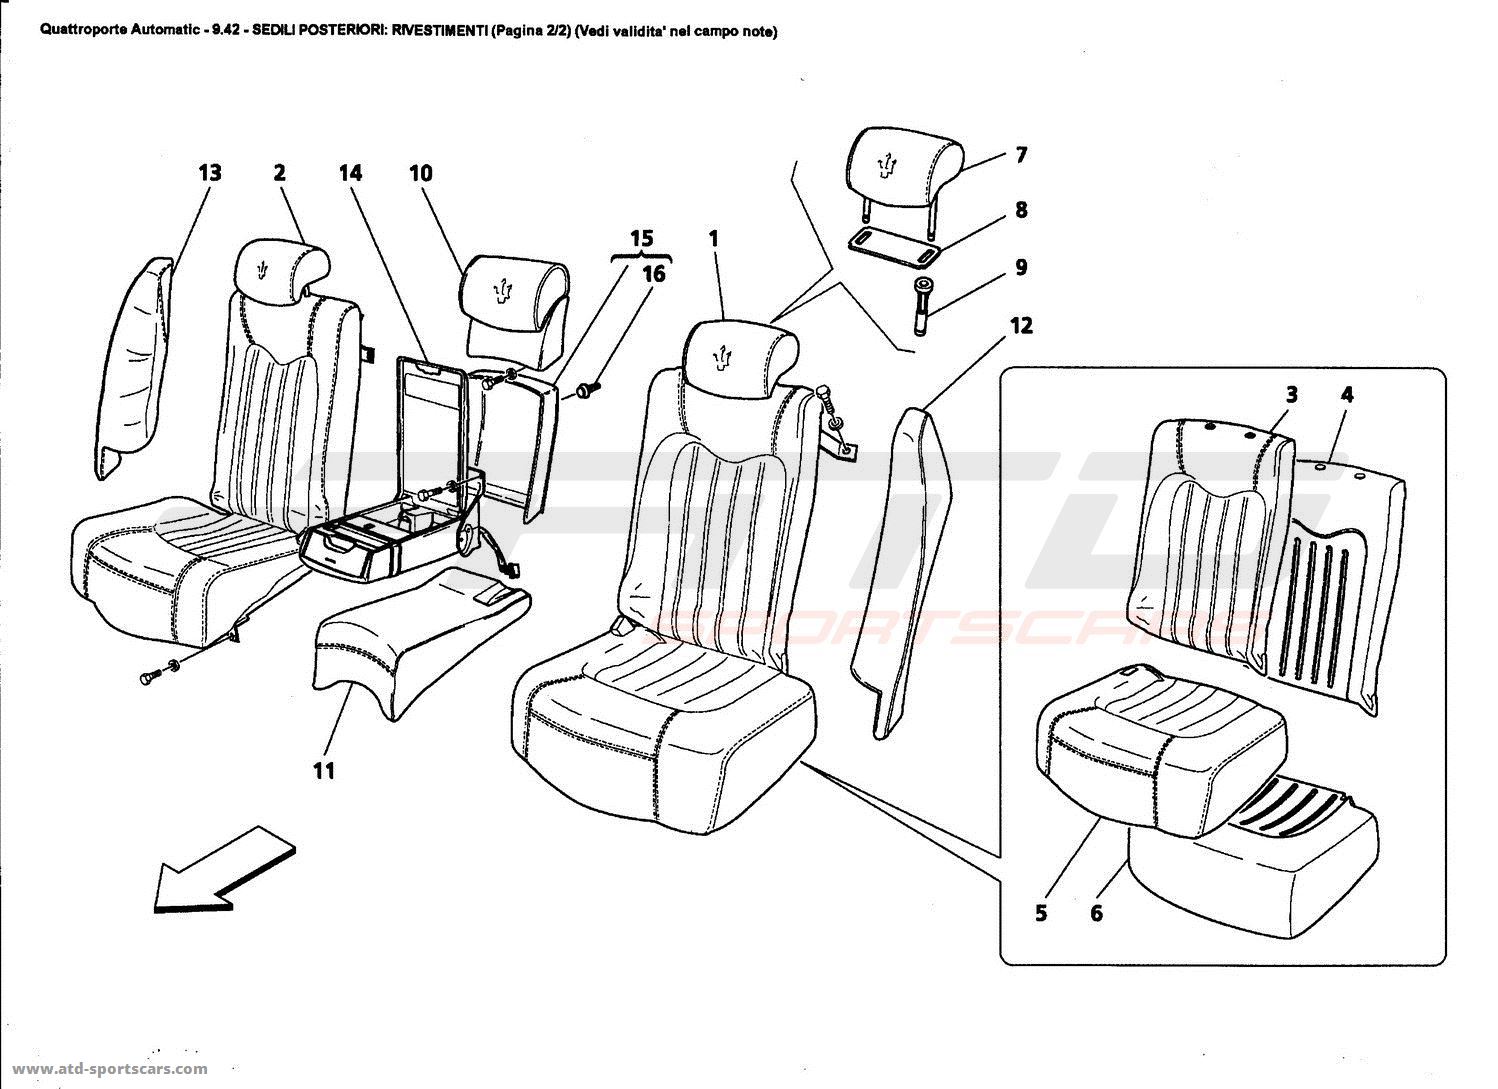 REAR SEATS: LININGS (Page 2/2) (See validity on note field)